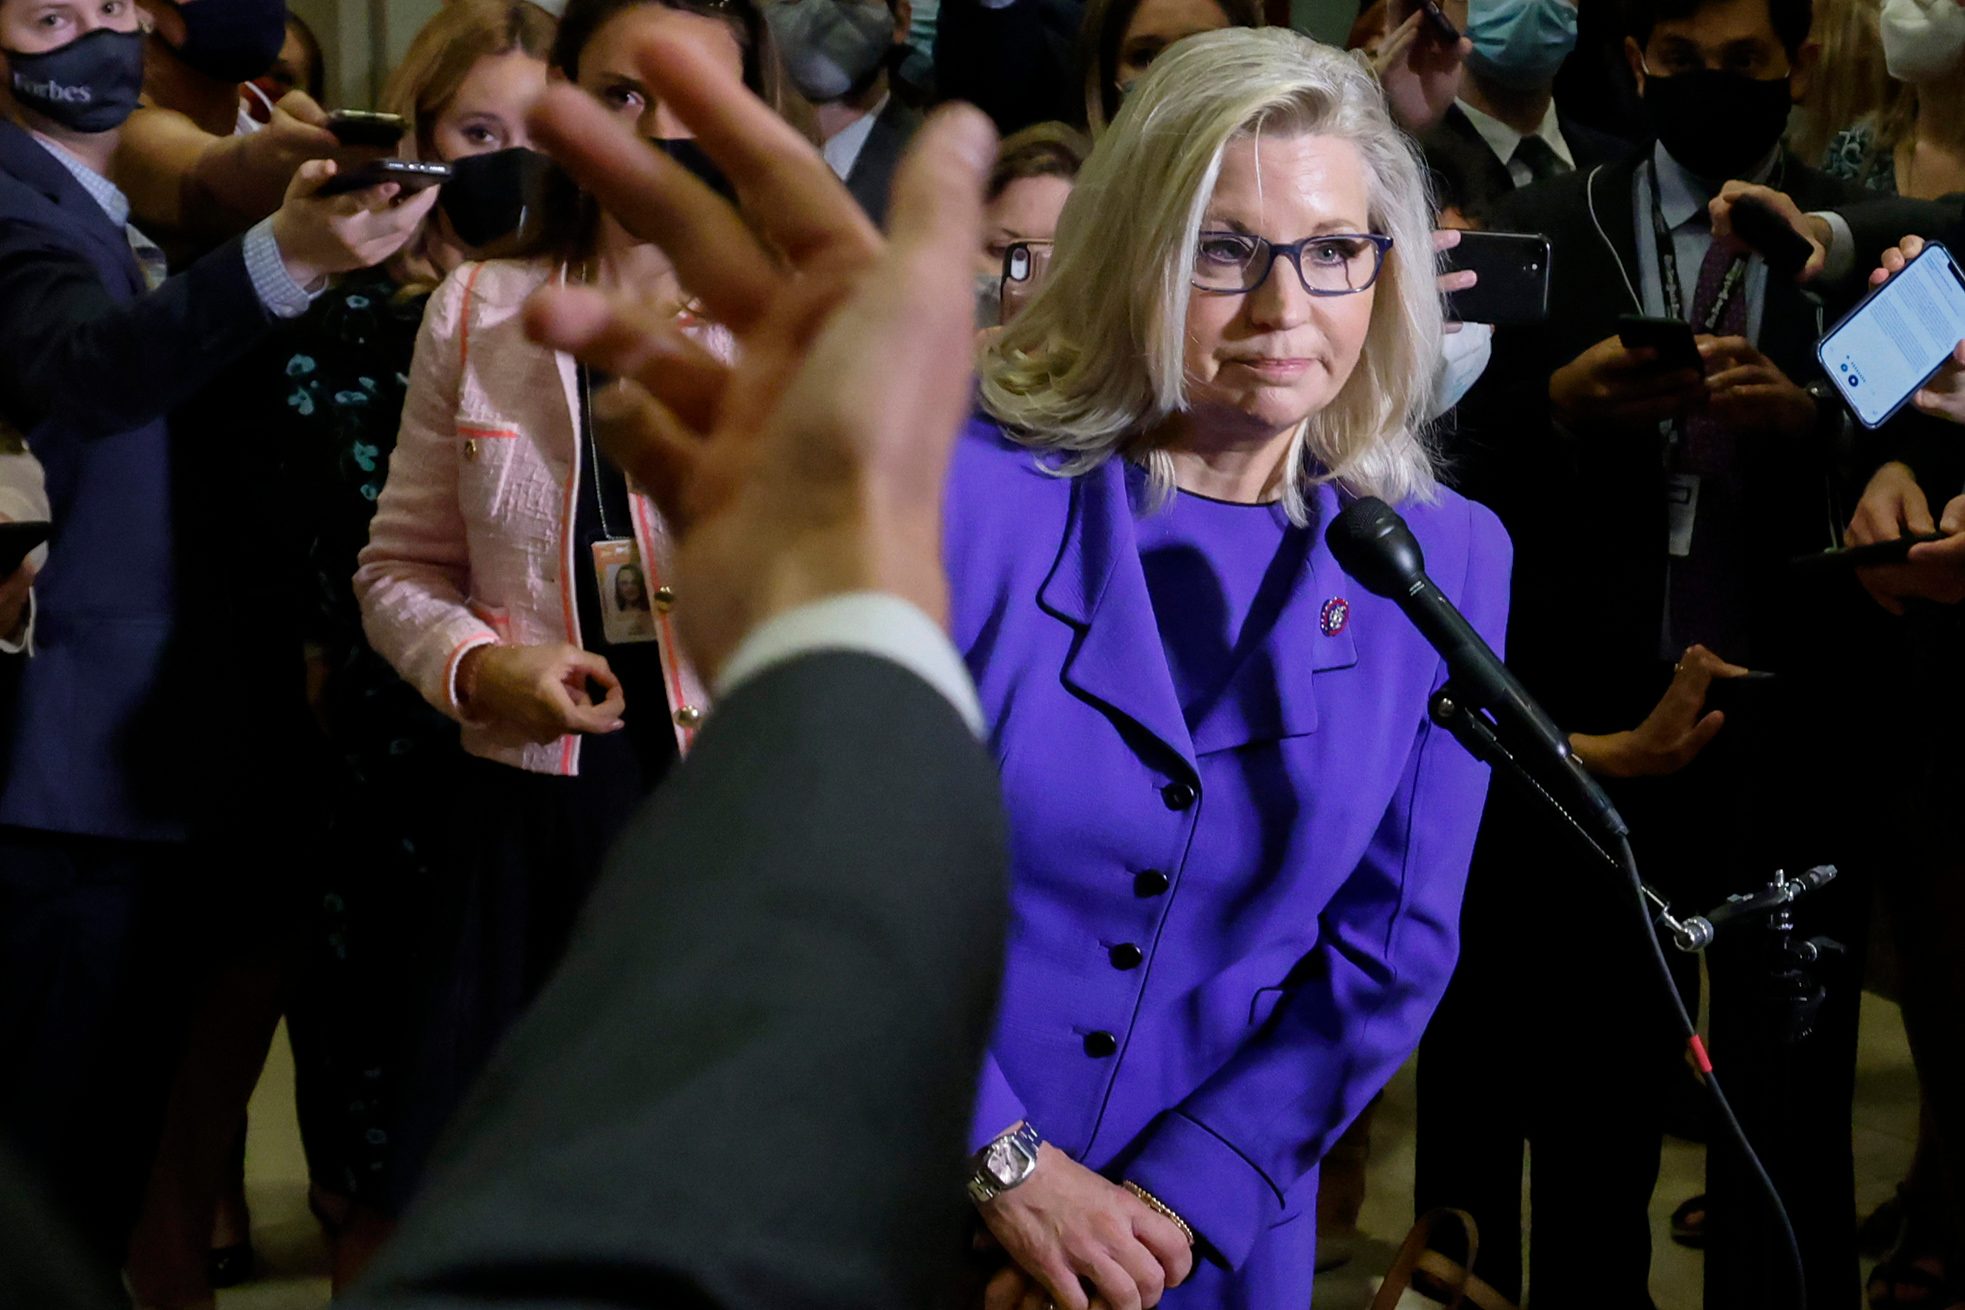 Cheney ousted by US House Republicans, but will seek re-election